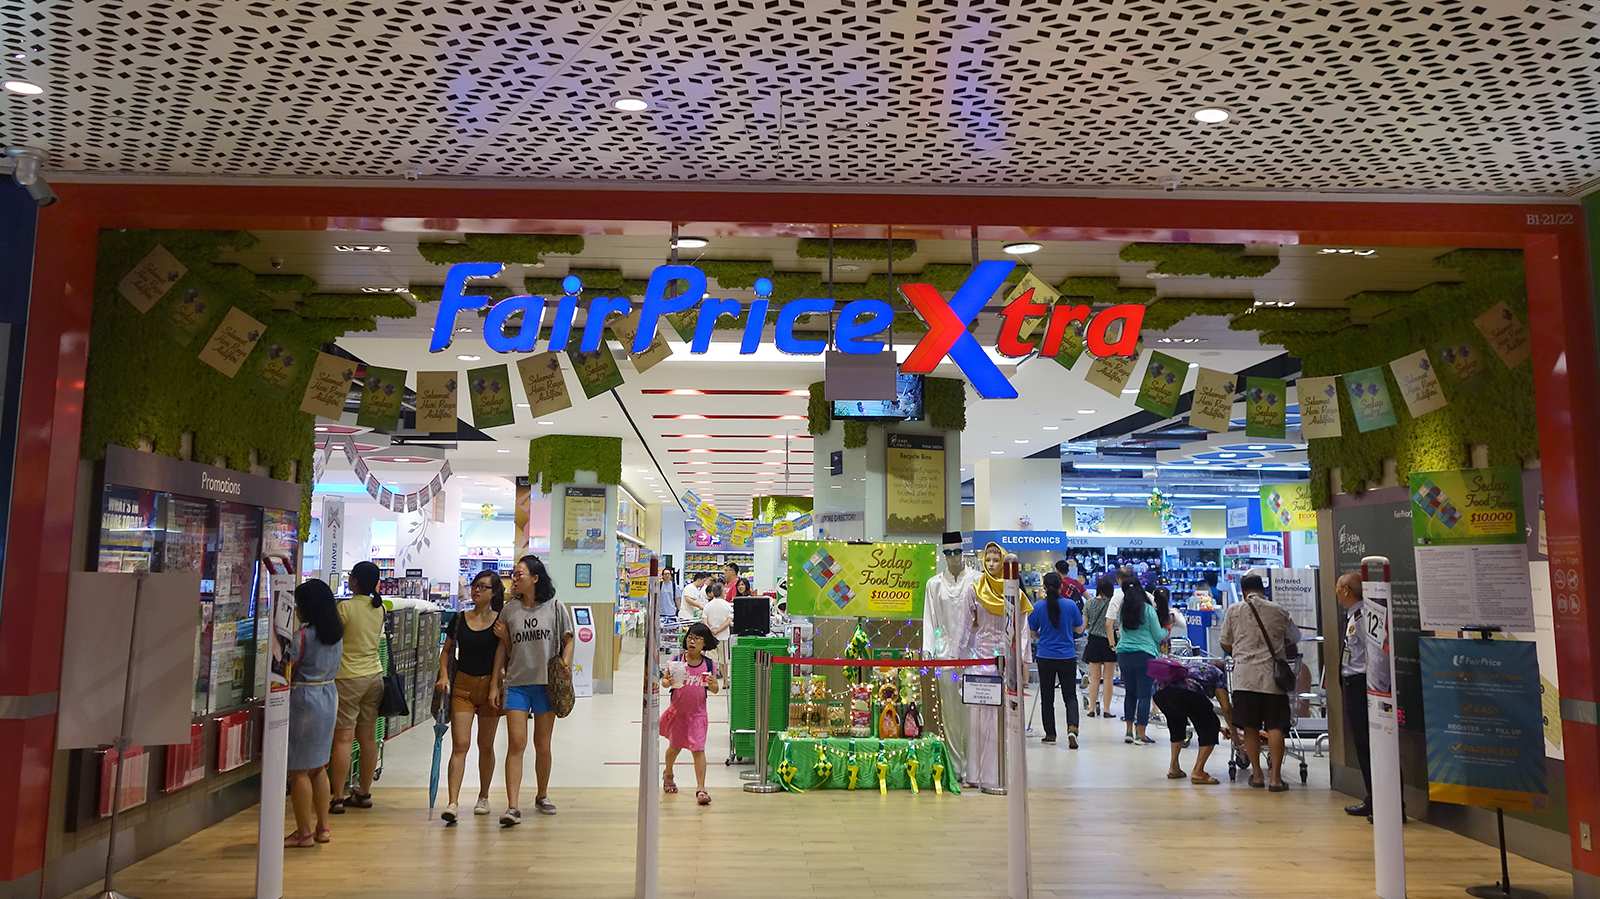 NTUC Fairprice staff go the extra mile to help elderly lady injured in a fall